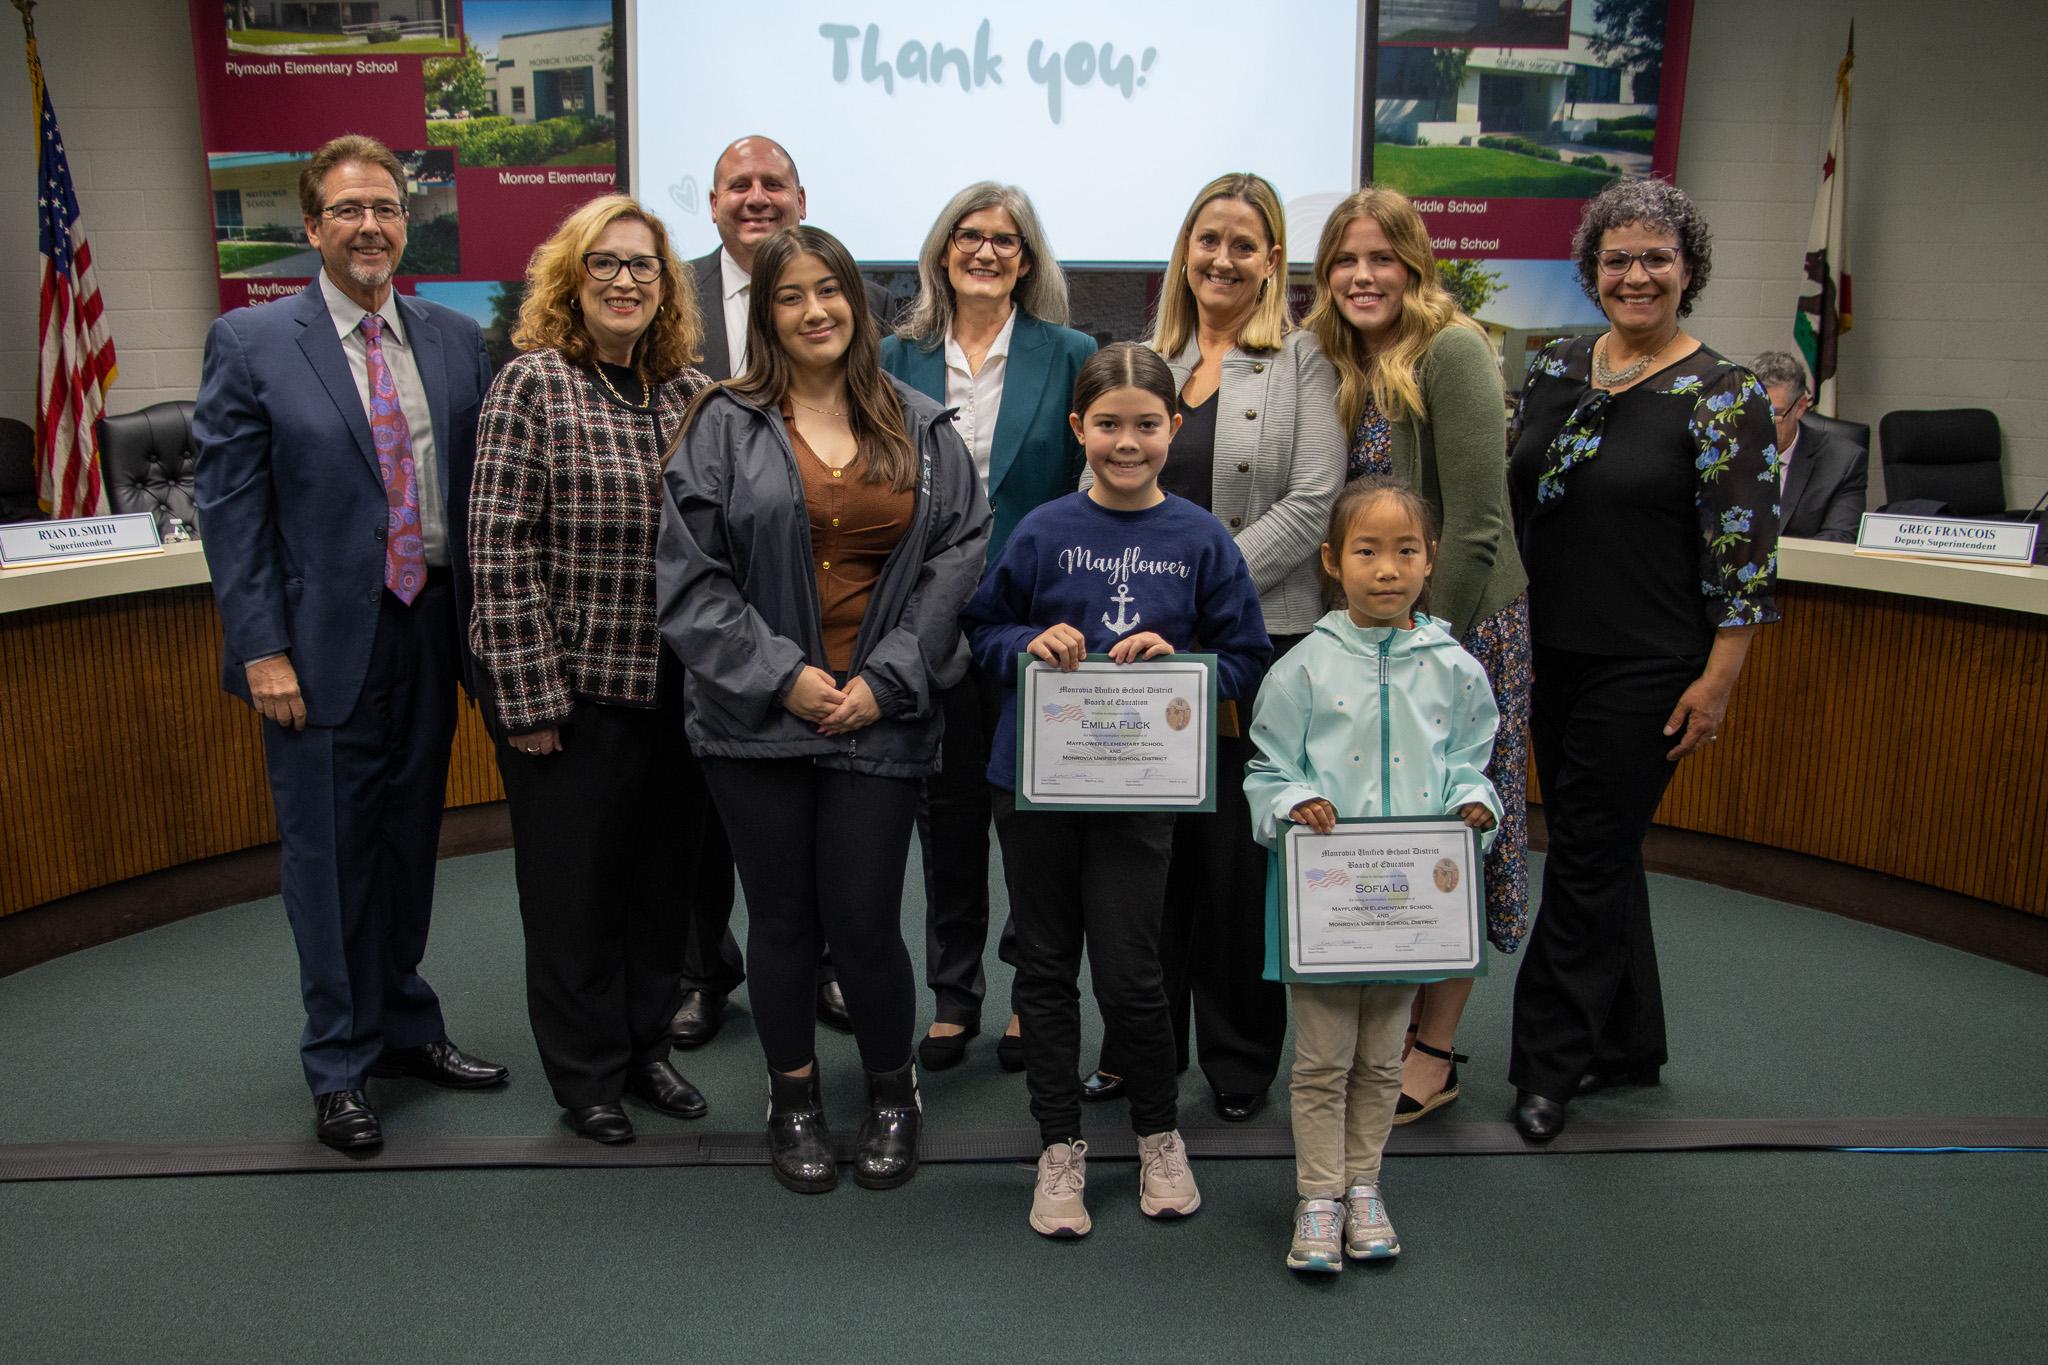 At its March meetings, the Monrovia Unified School District Board of Education invited students from Wild Rose School of Creative Arts and Mayflower Elementary to lead the Pledge of Allegiance.